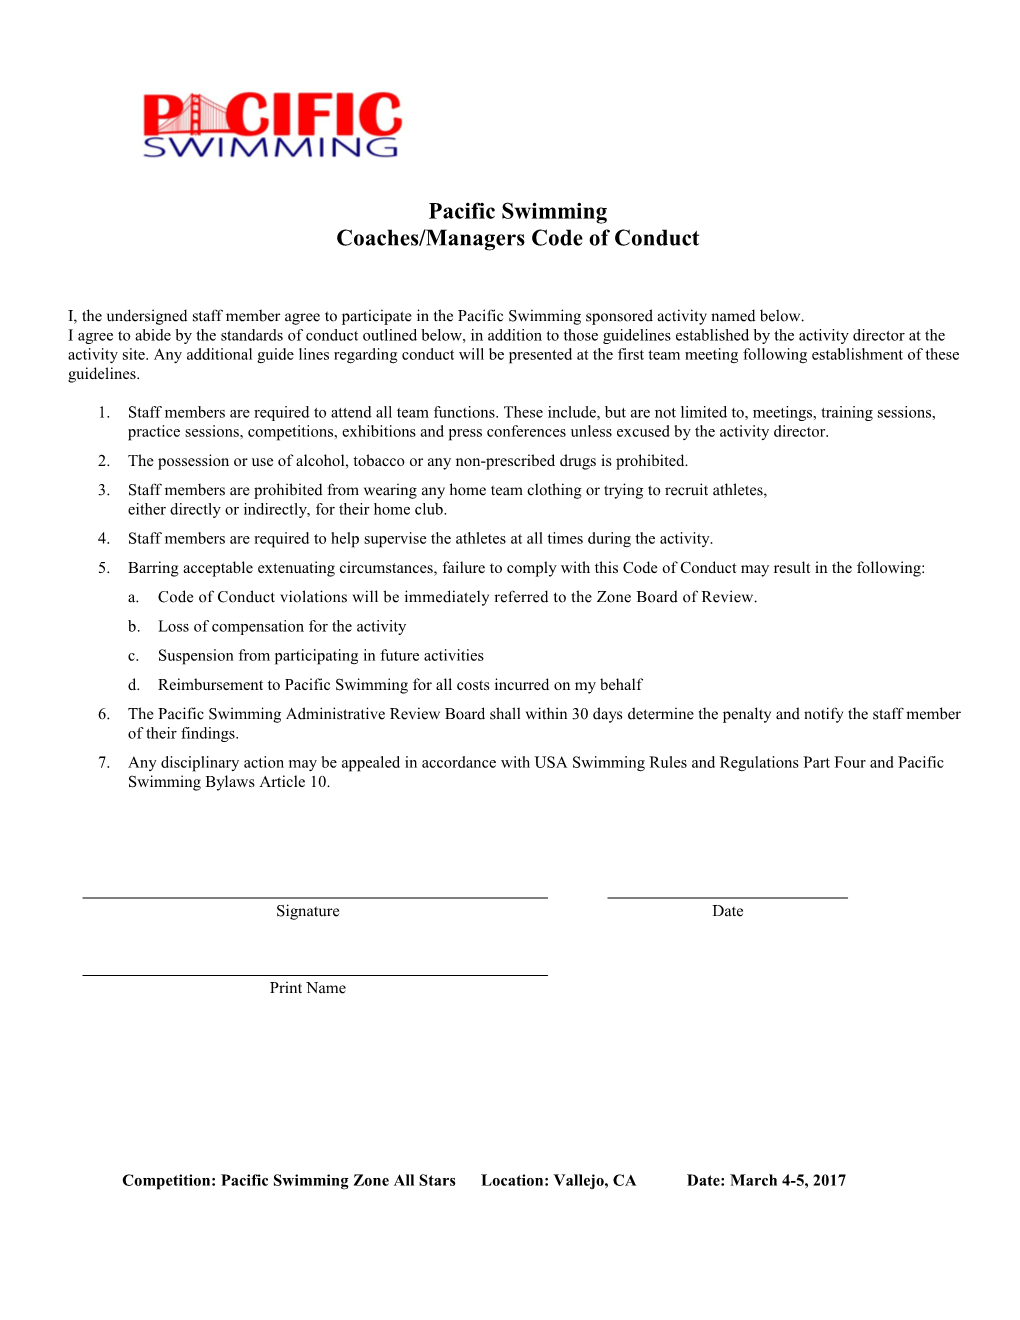 ZONE-3 Coach/Manager/Chaperone Application and Information